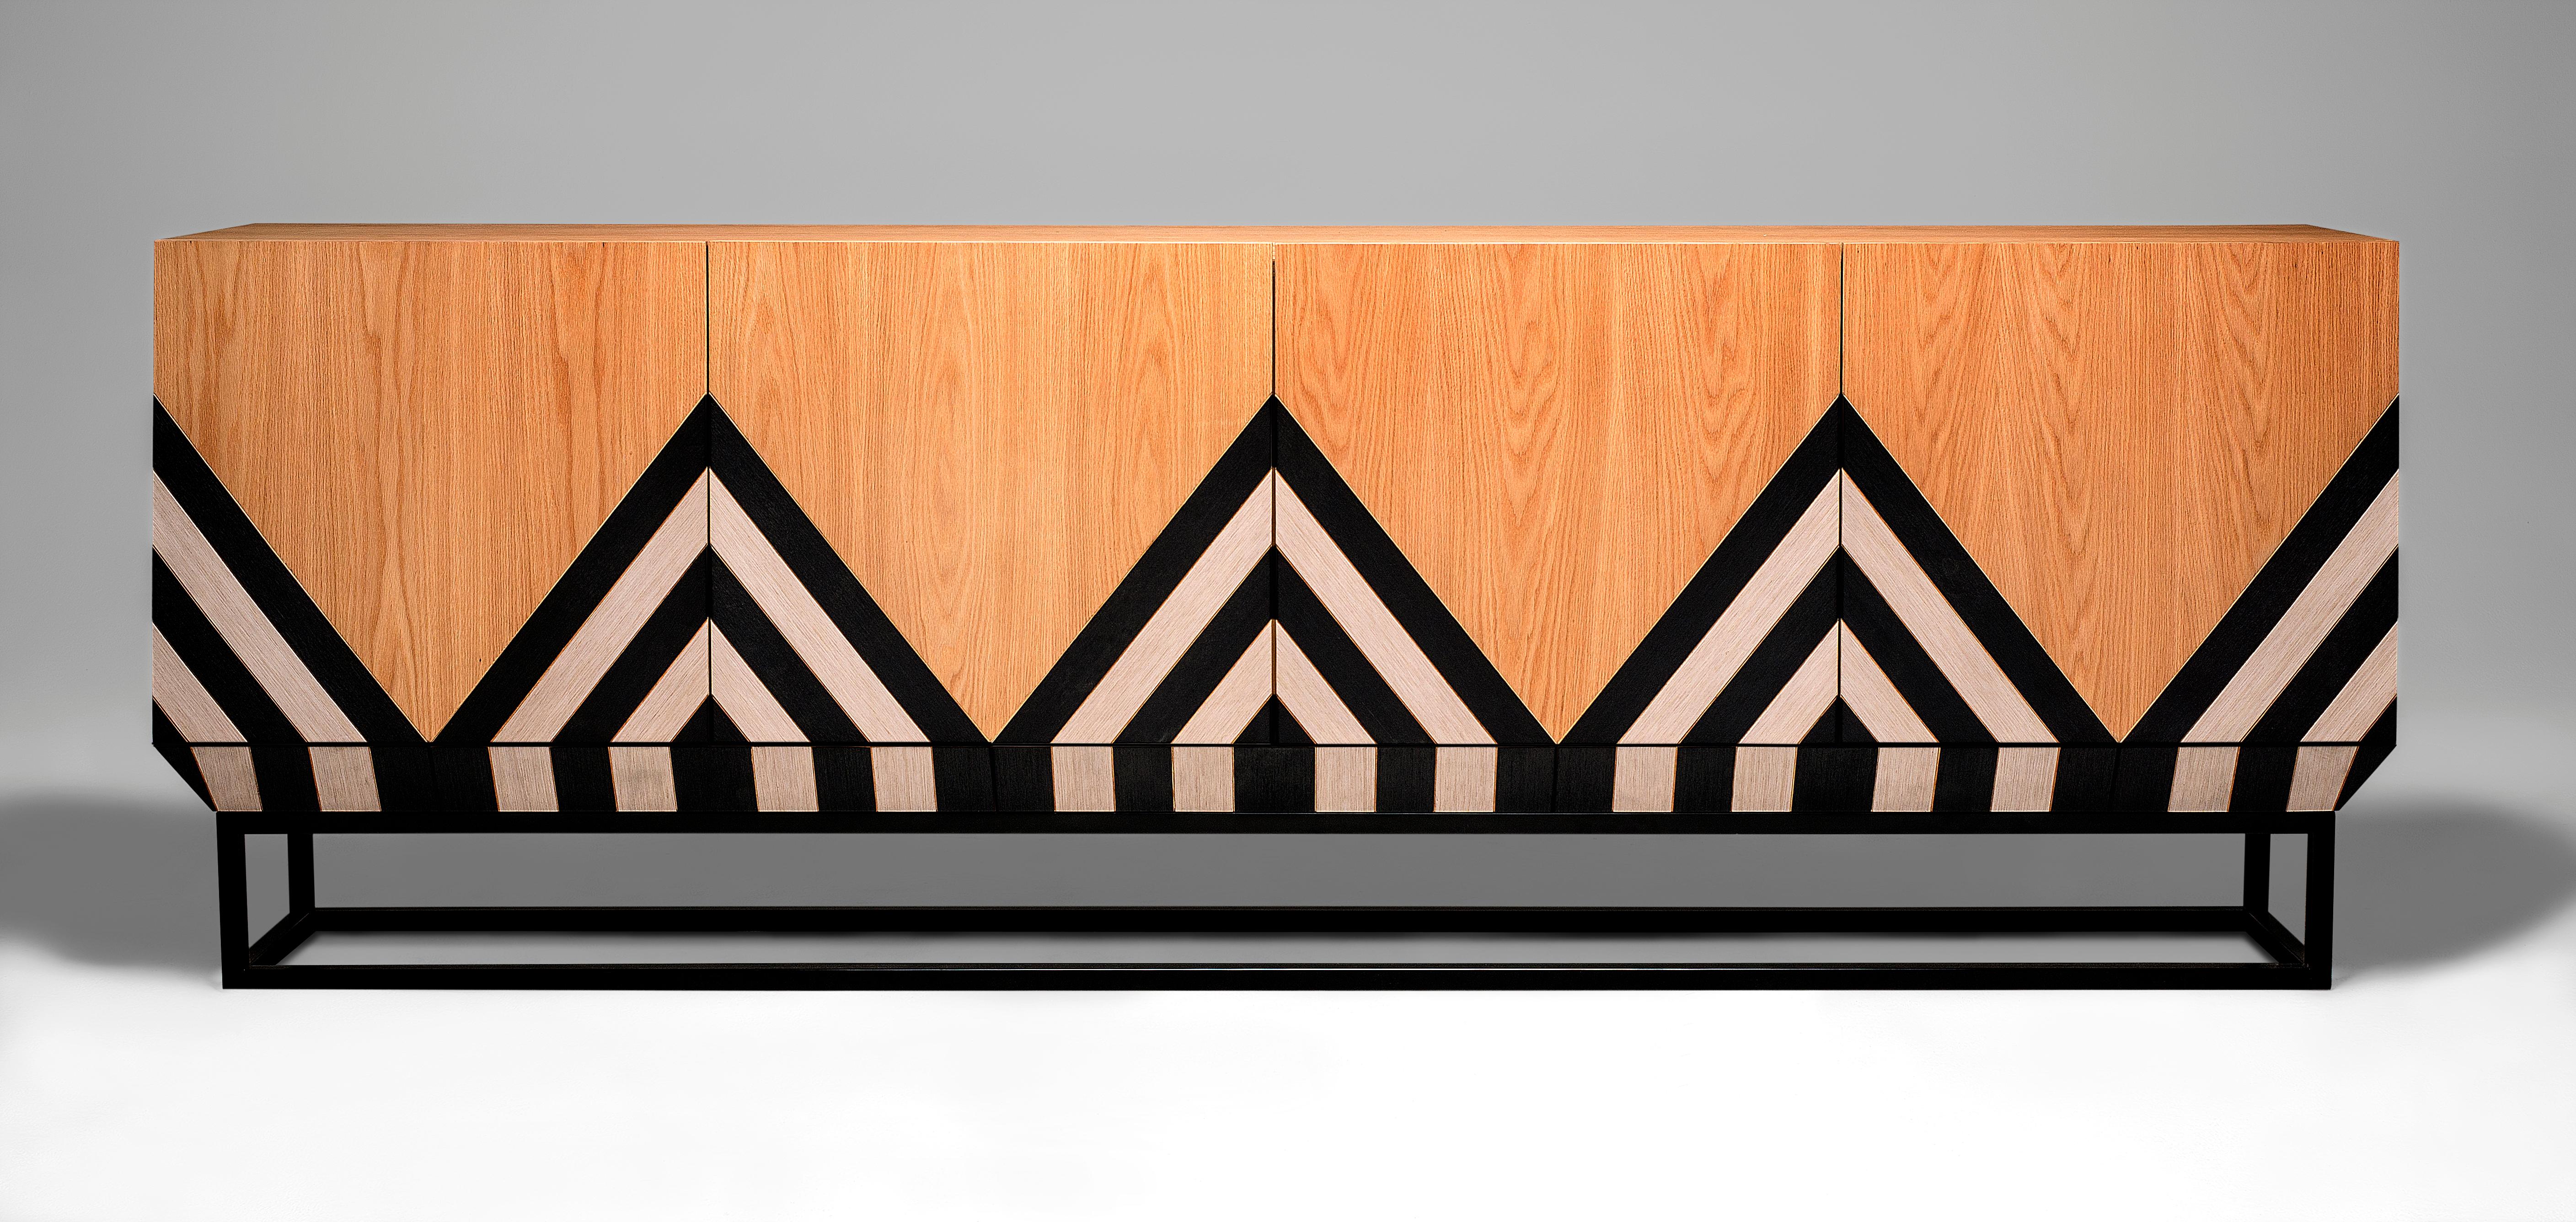 Perfectly signing its name, the textures and diamond shaped arrangement of wood tiles engraves each cabinet with a tribal-like aesthetic — inspiration that could only have been had by international designer Larissa Batista. Every exclusive Martin